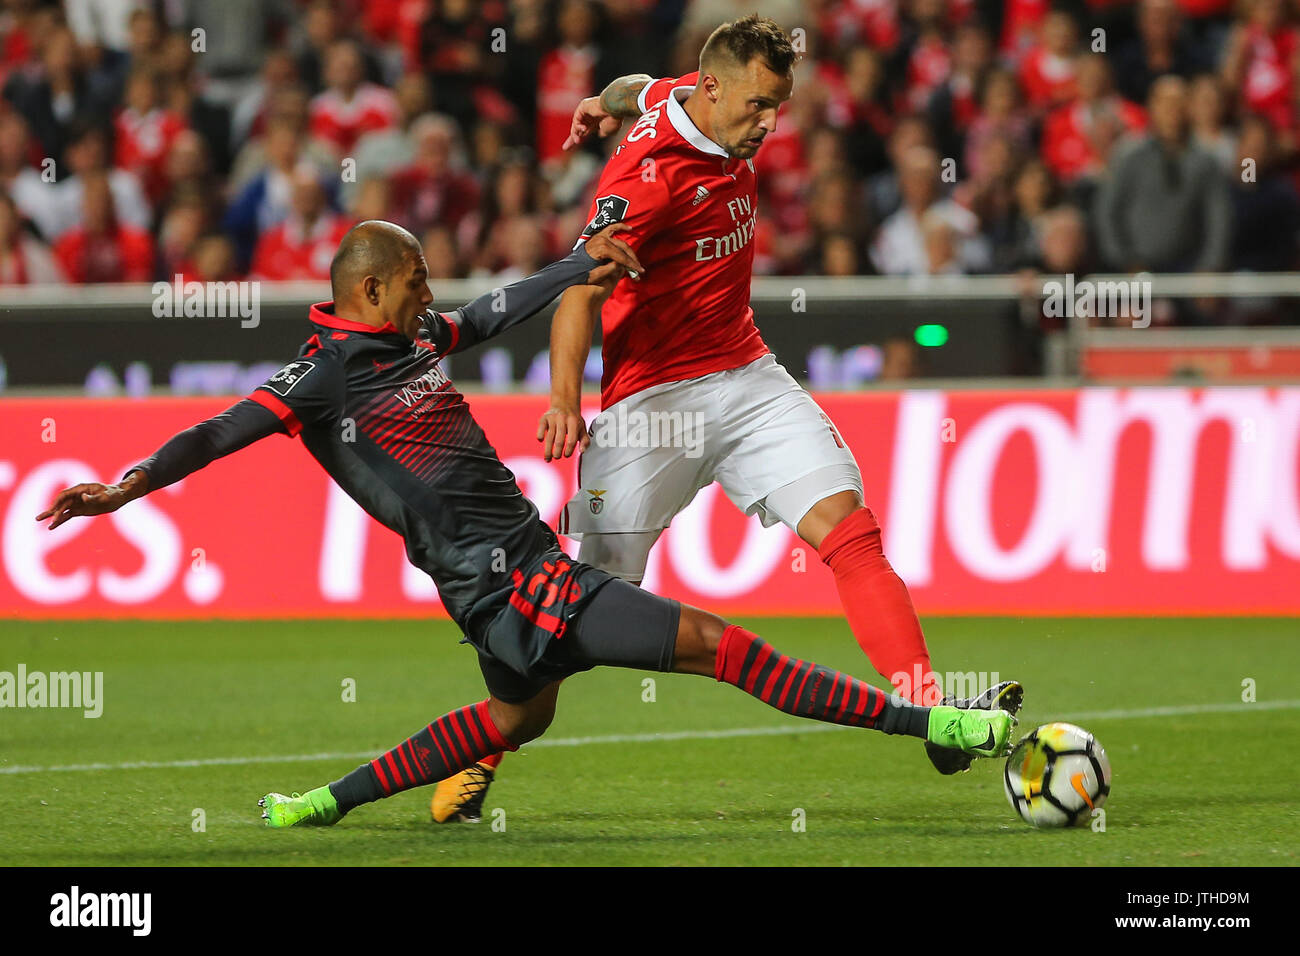 Lisbon, Portugal. 09th Aug, 2017. Benfica«s forward Haris Seferovic from Switzerland (R) and Braga«s defender Raul Silva from Brazil (L) during the Premier League 2017/18 match between SL Benfica v SC Braga, at Luz Stadium in Lisbon on August 9, 2017. Credit: Bruno Barros/Alamy Live News Stock Photo